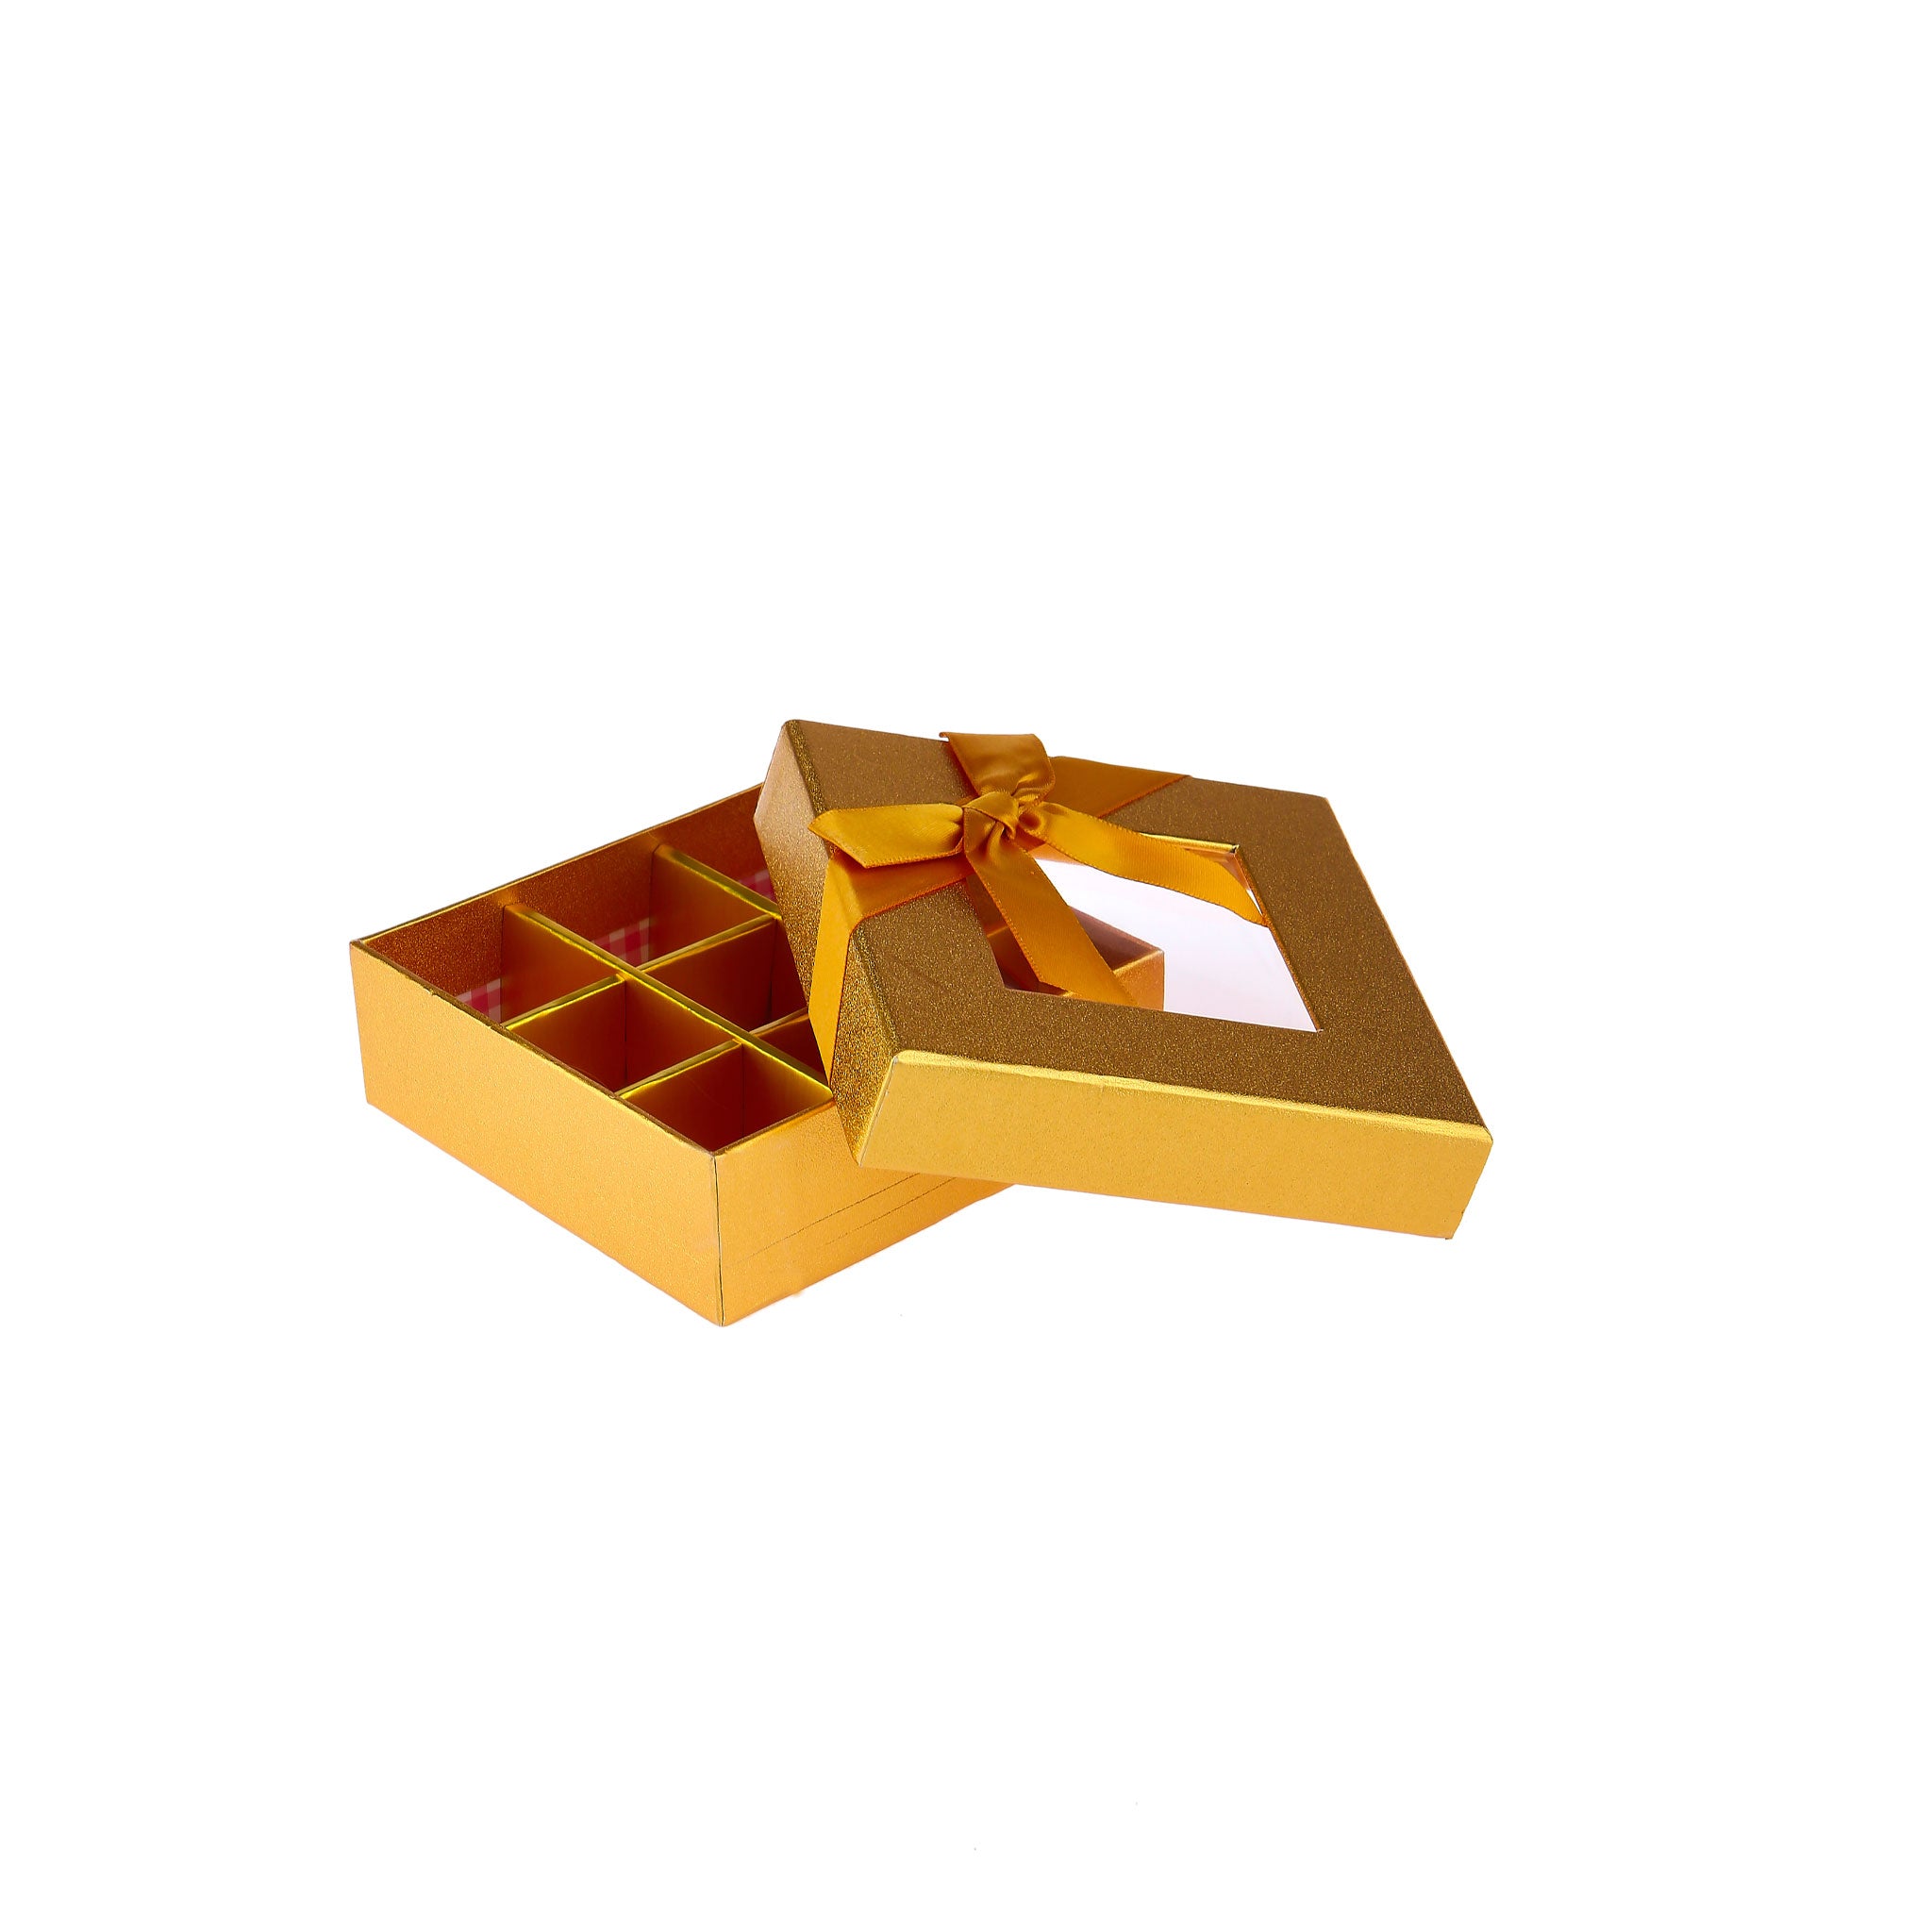 Square Chocolate Gift Box Shape 09 Division - 1 Piece - Hotpack Global